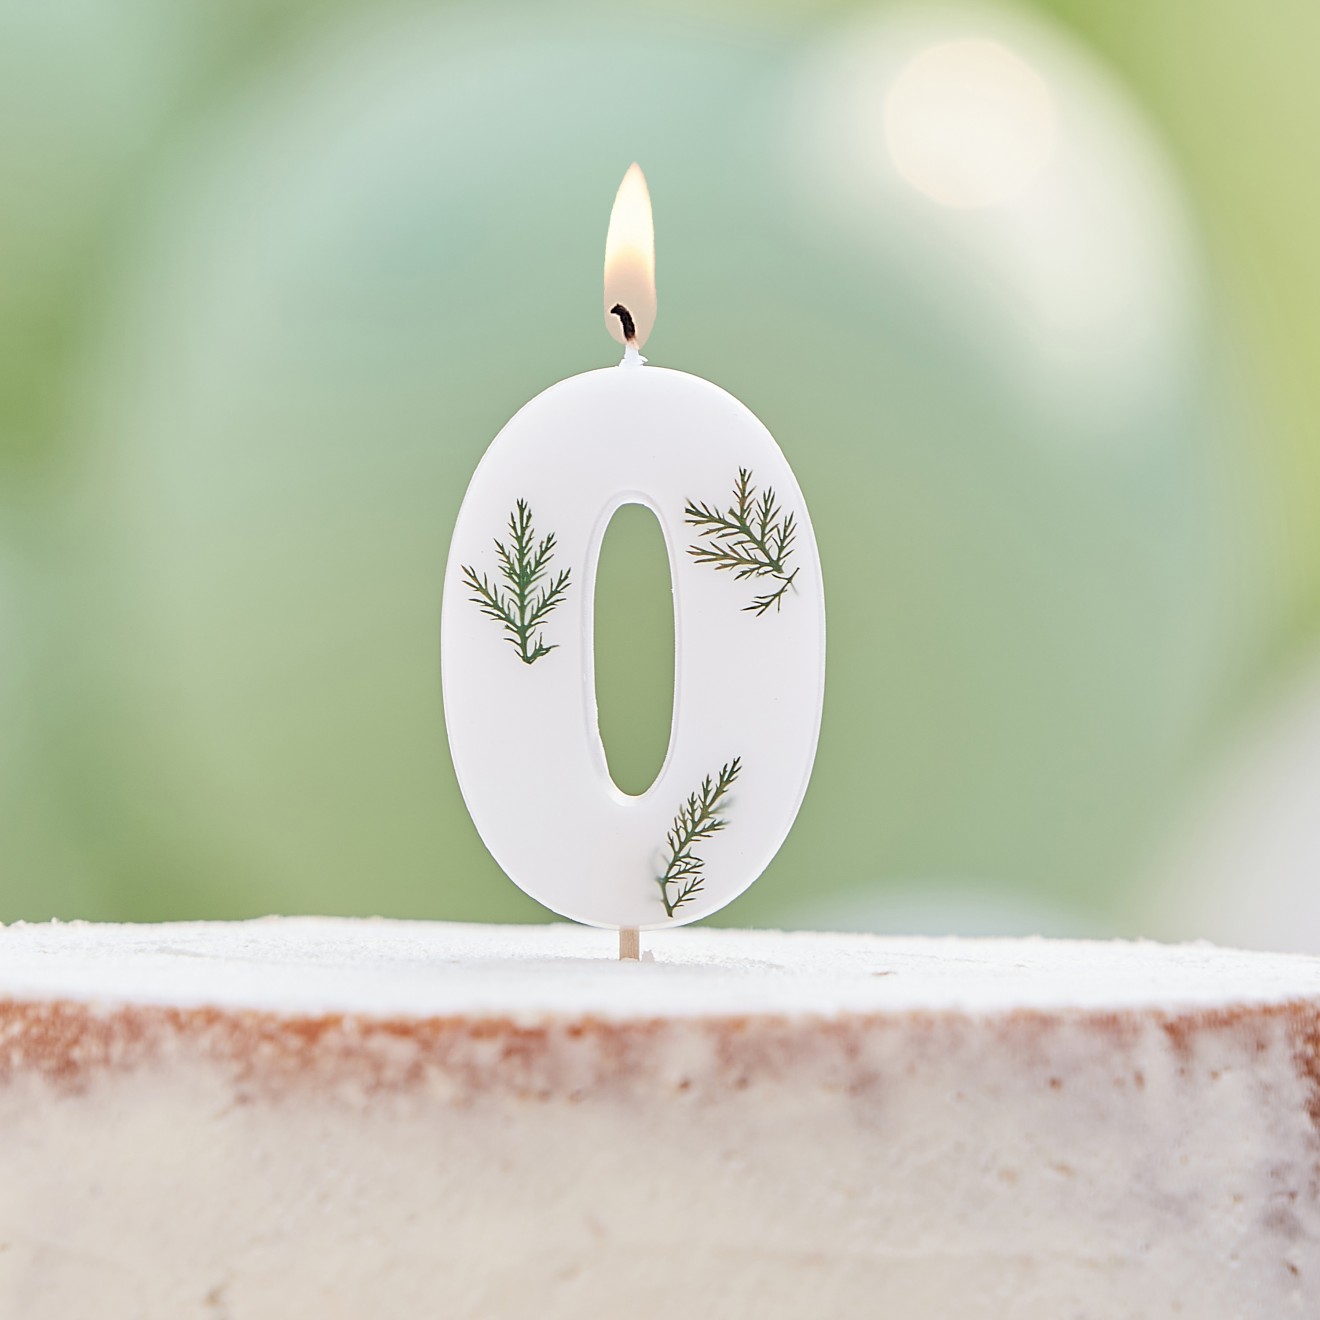 1 Candle - Number 0 - Pressed Foliage